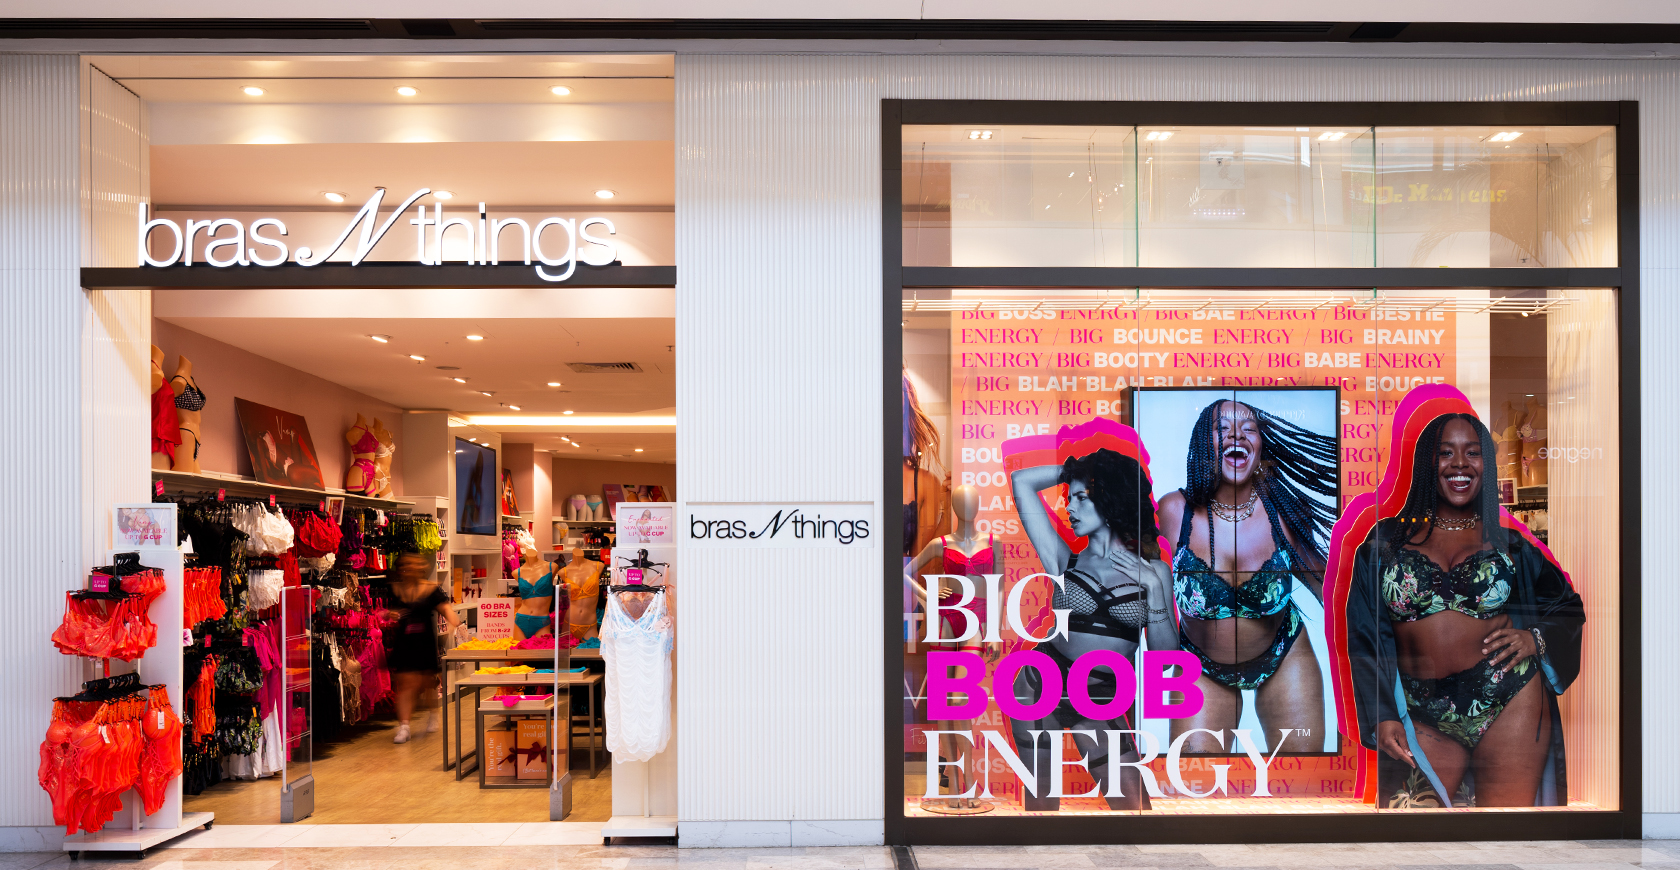 Bras N Things defines big boob energy in newly launched campaign